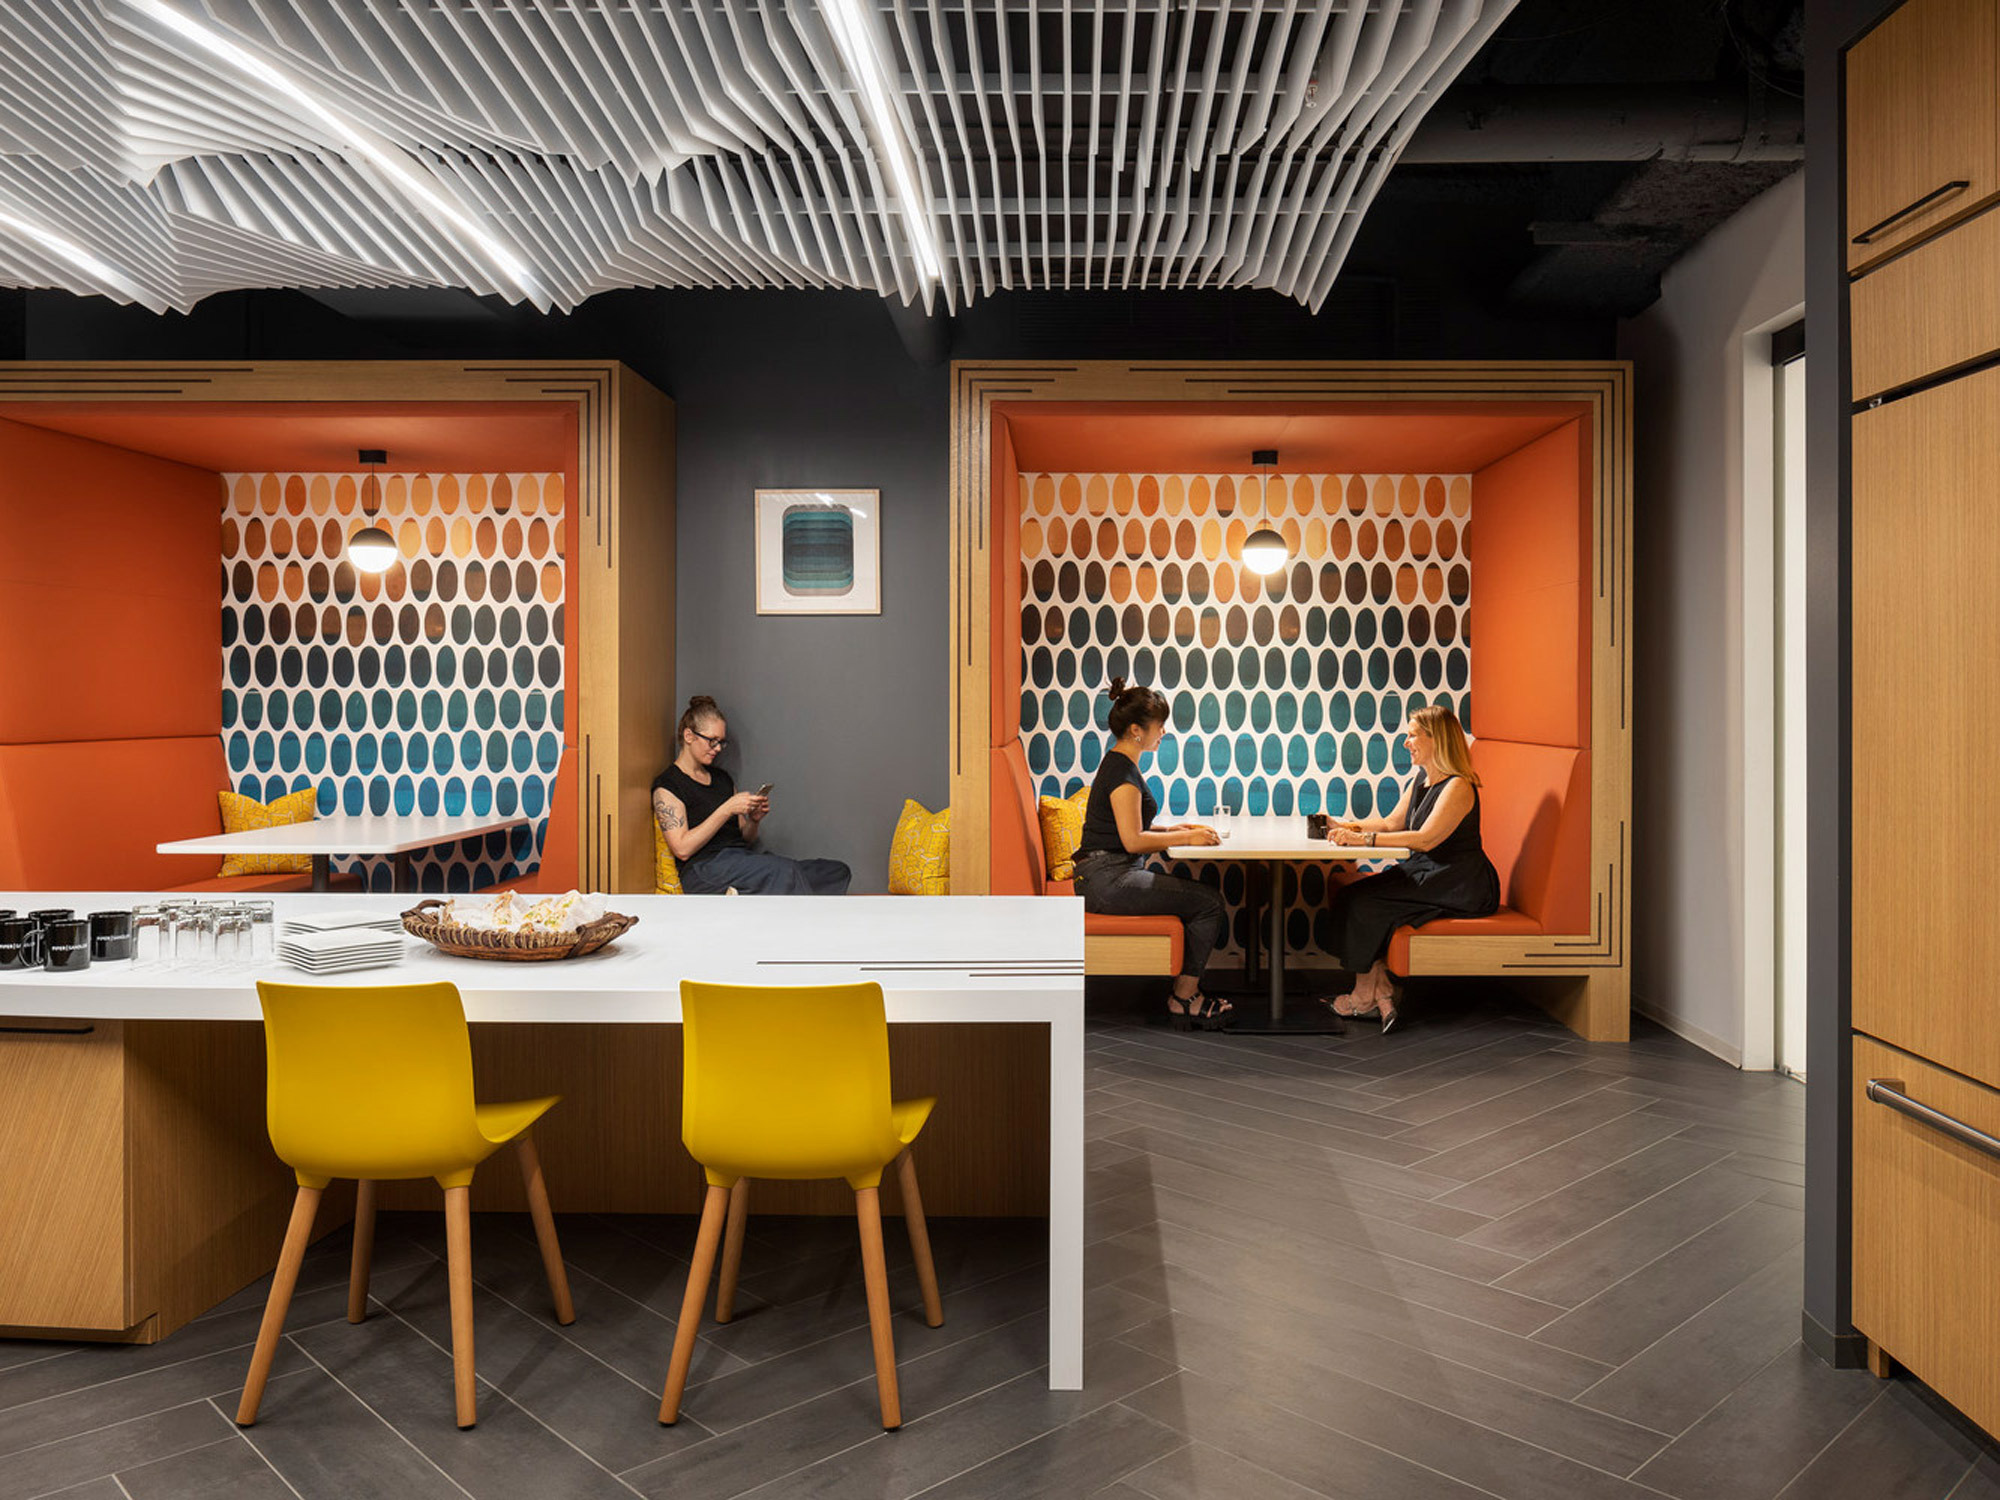 Bright, modern office breakroom featuring undulating ceiling panels, vibrant orange booths, honeycomb-patterned dividers, and bold yellow chairs around a minimalist white table. Natural wood accents complement the space's dynamic and inviting atmosphere.